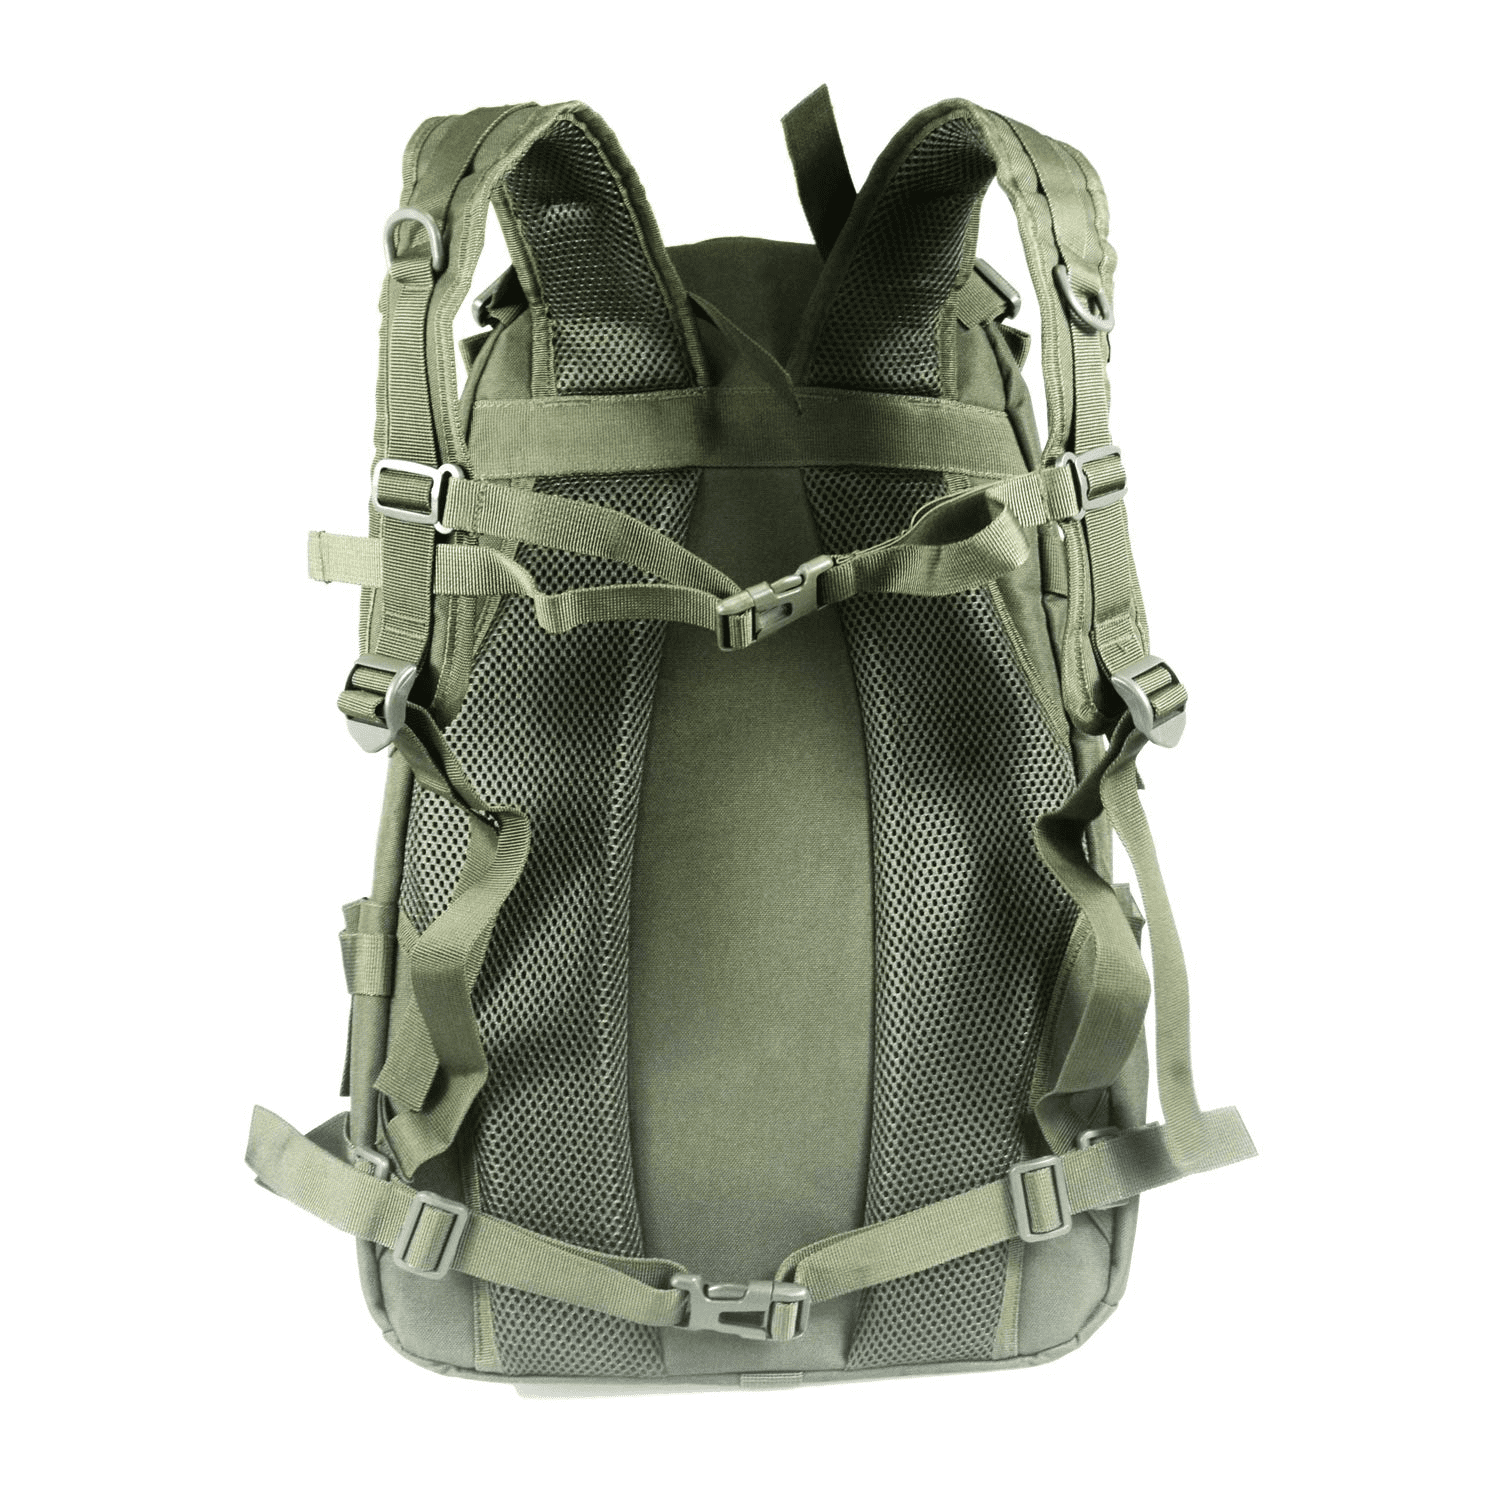 Lhi Backpack Review